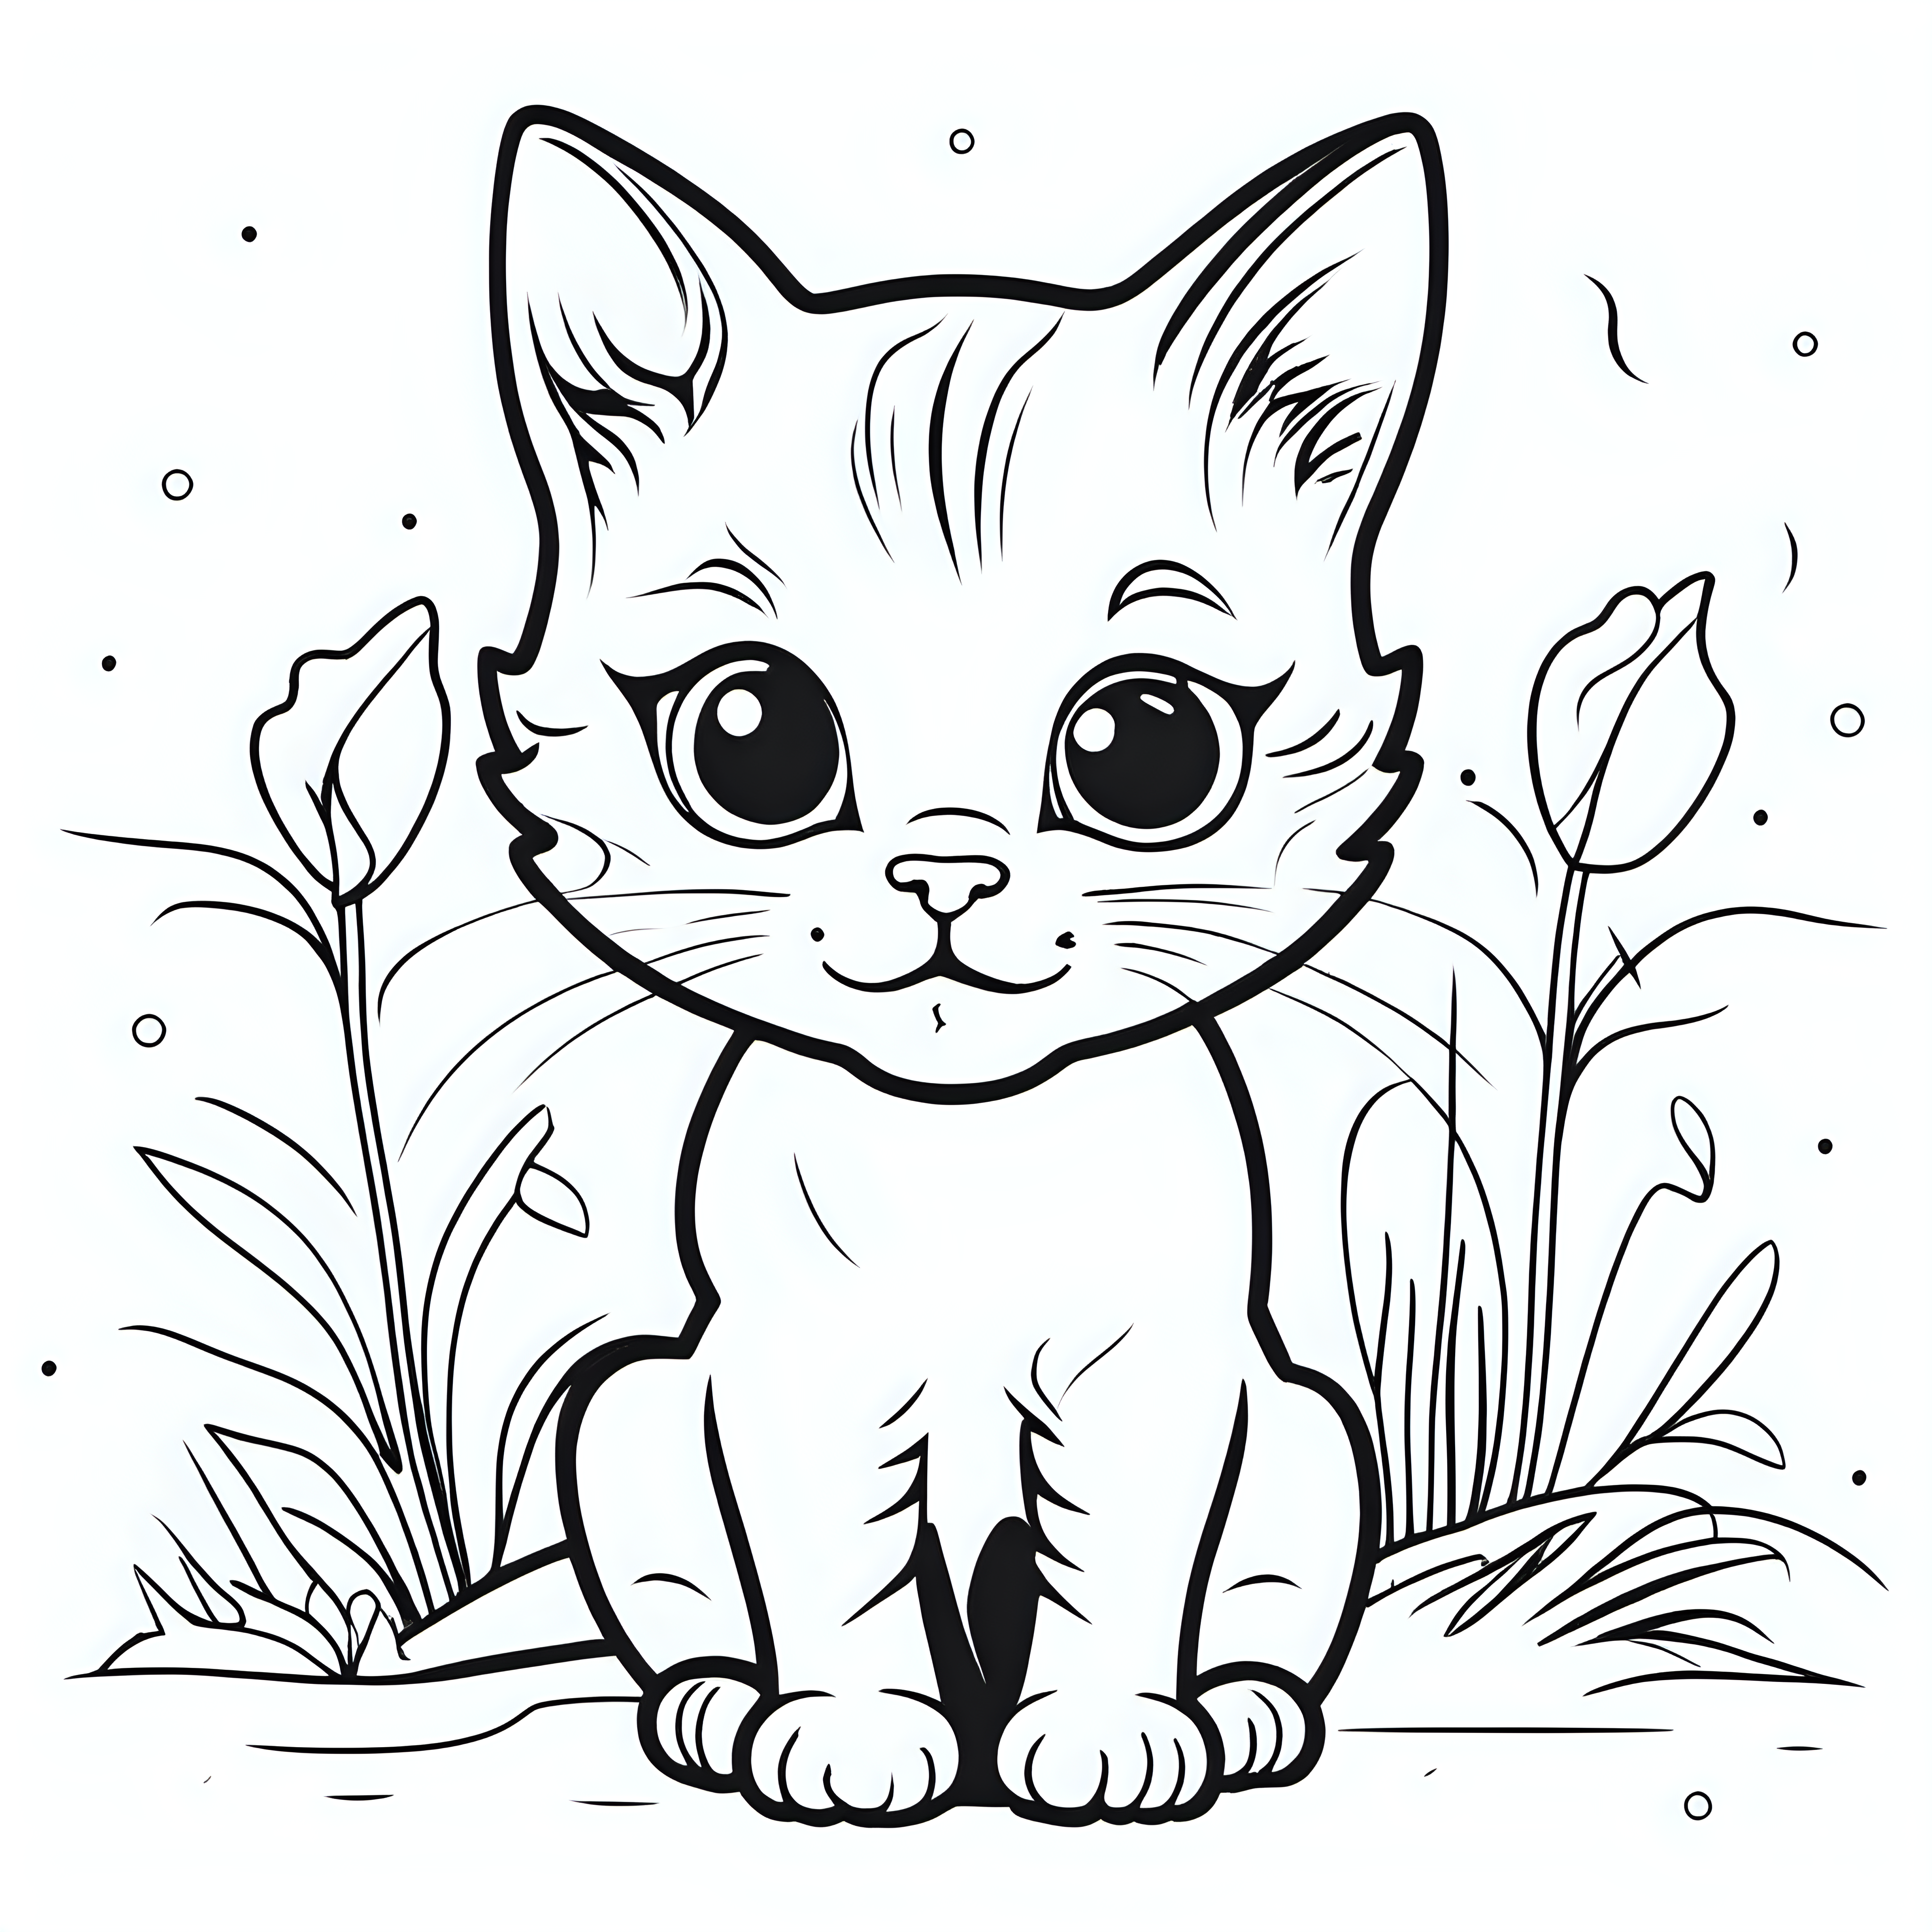 Create a cute baby cat outline in black